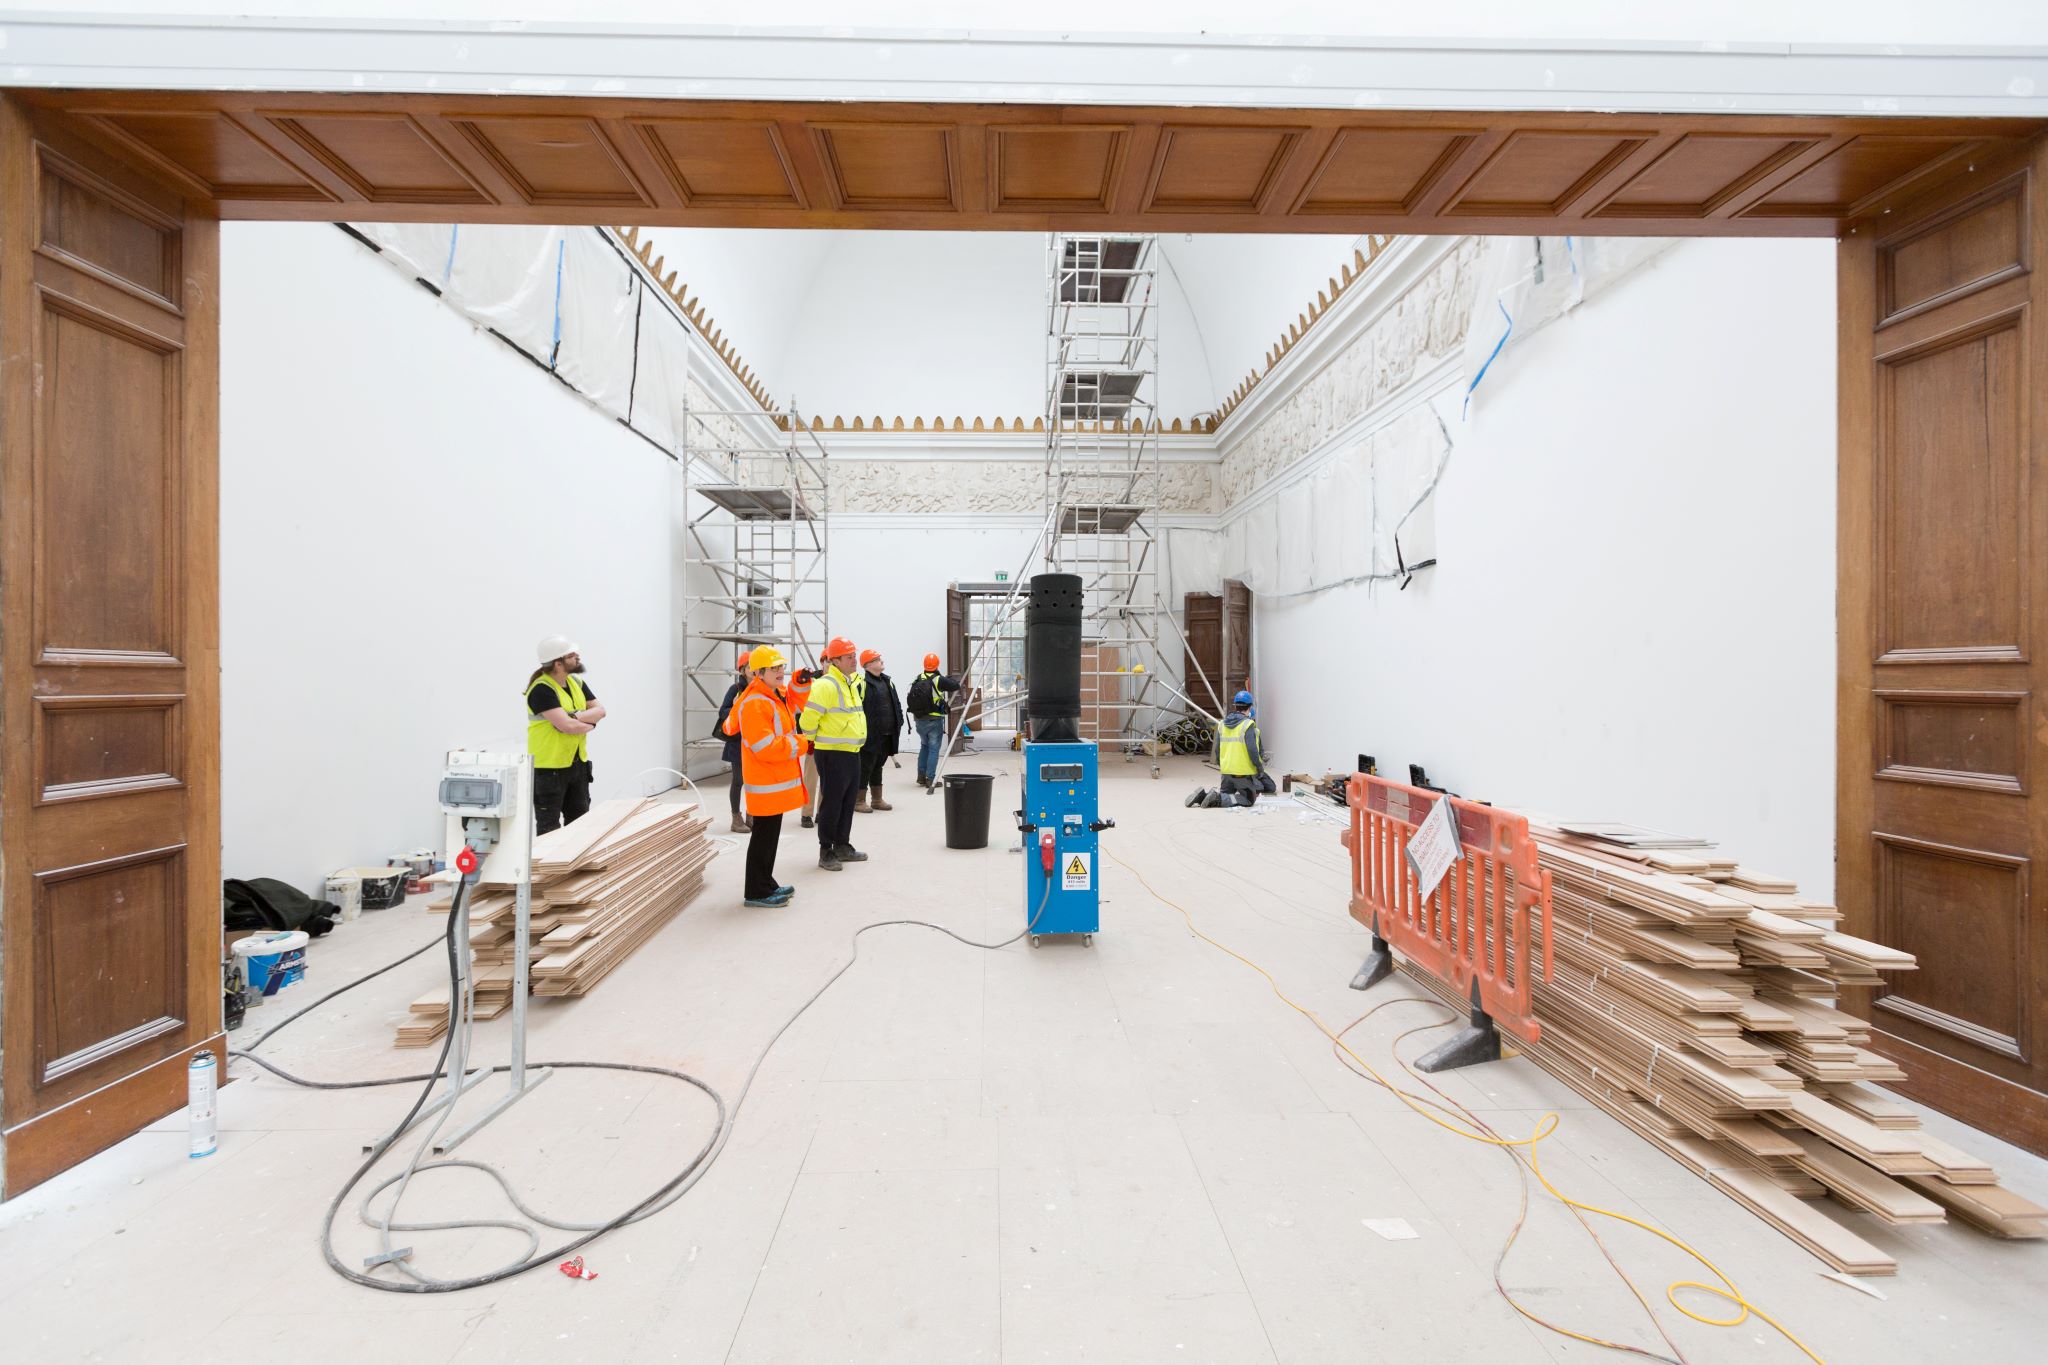 A large open gallery space, people in high vis jackets and safety helmets gather in the centre, there are wooden floorboards to the side of the room 